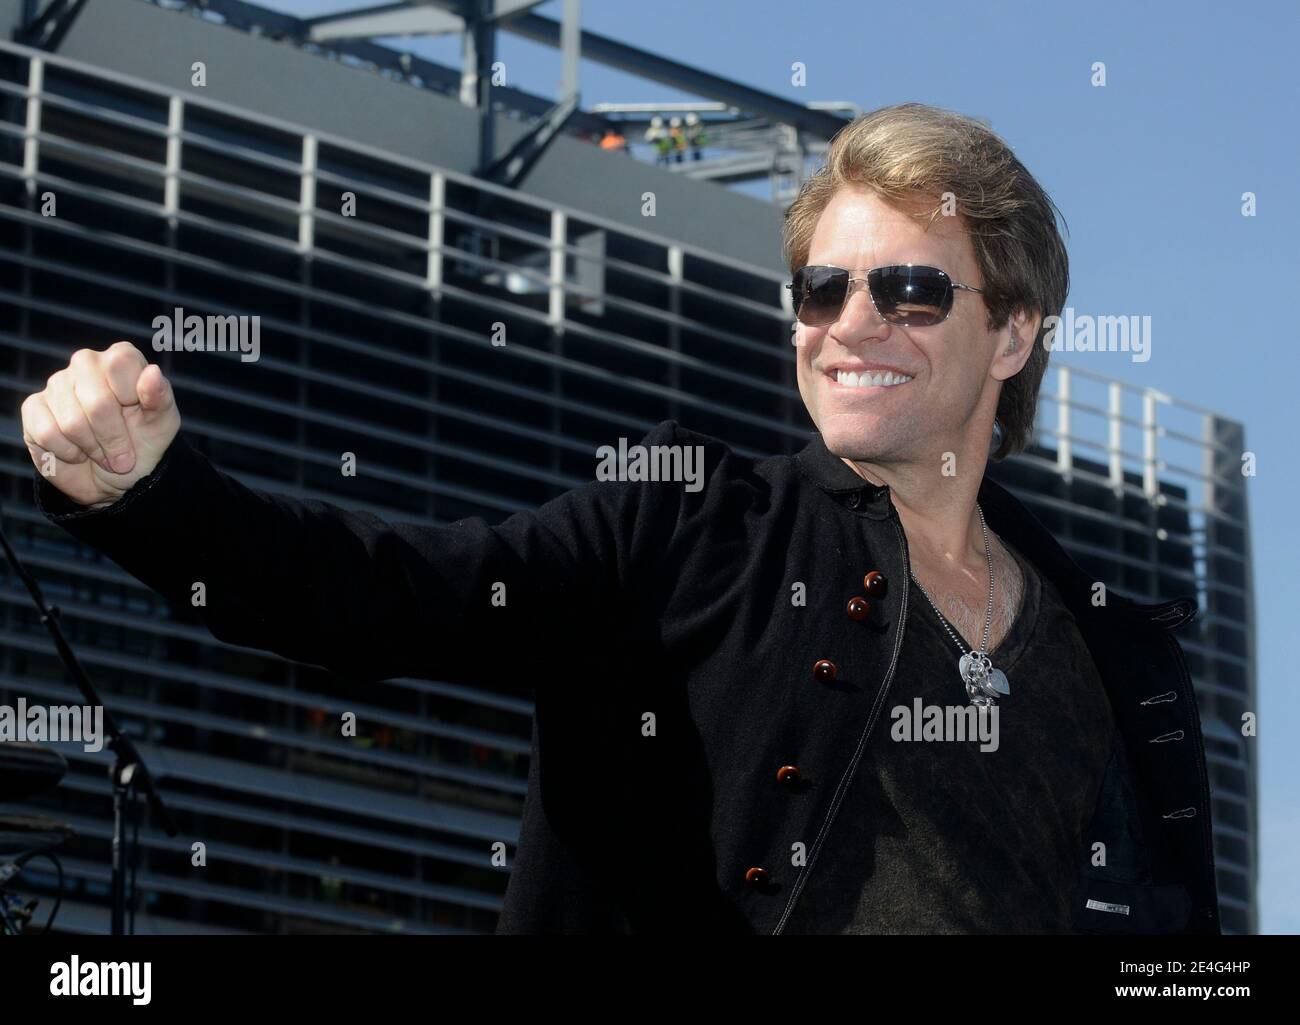 Bon Jovi lead singer Jon Bon Jovi performing during the concert outside the new Meadowlands Stadium during a special concert/media event in the Meadowlands, NJ, USA on October 22, 2009. Photo by Fernando Leon/ABACAPRESS.COM Stock Photo